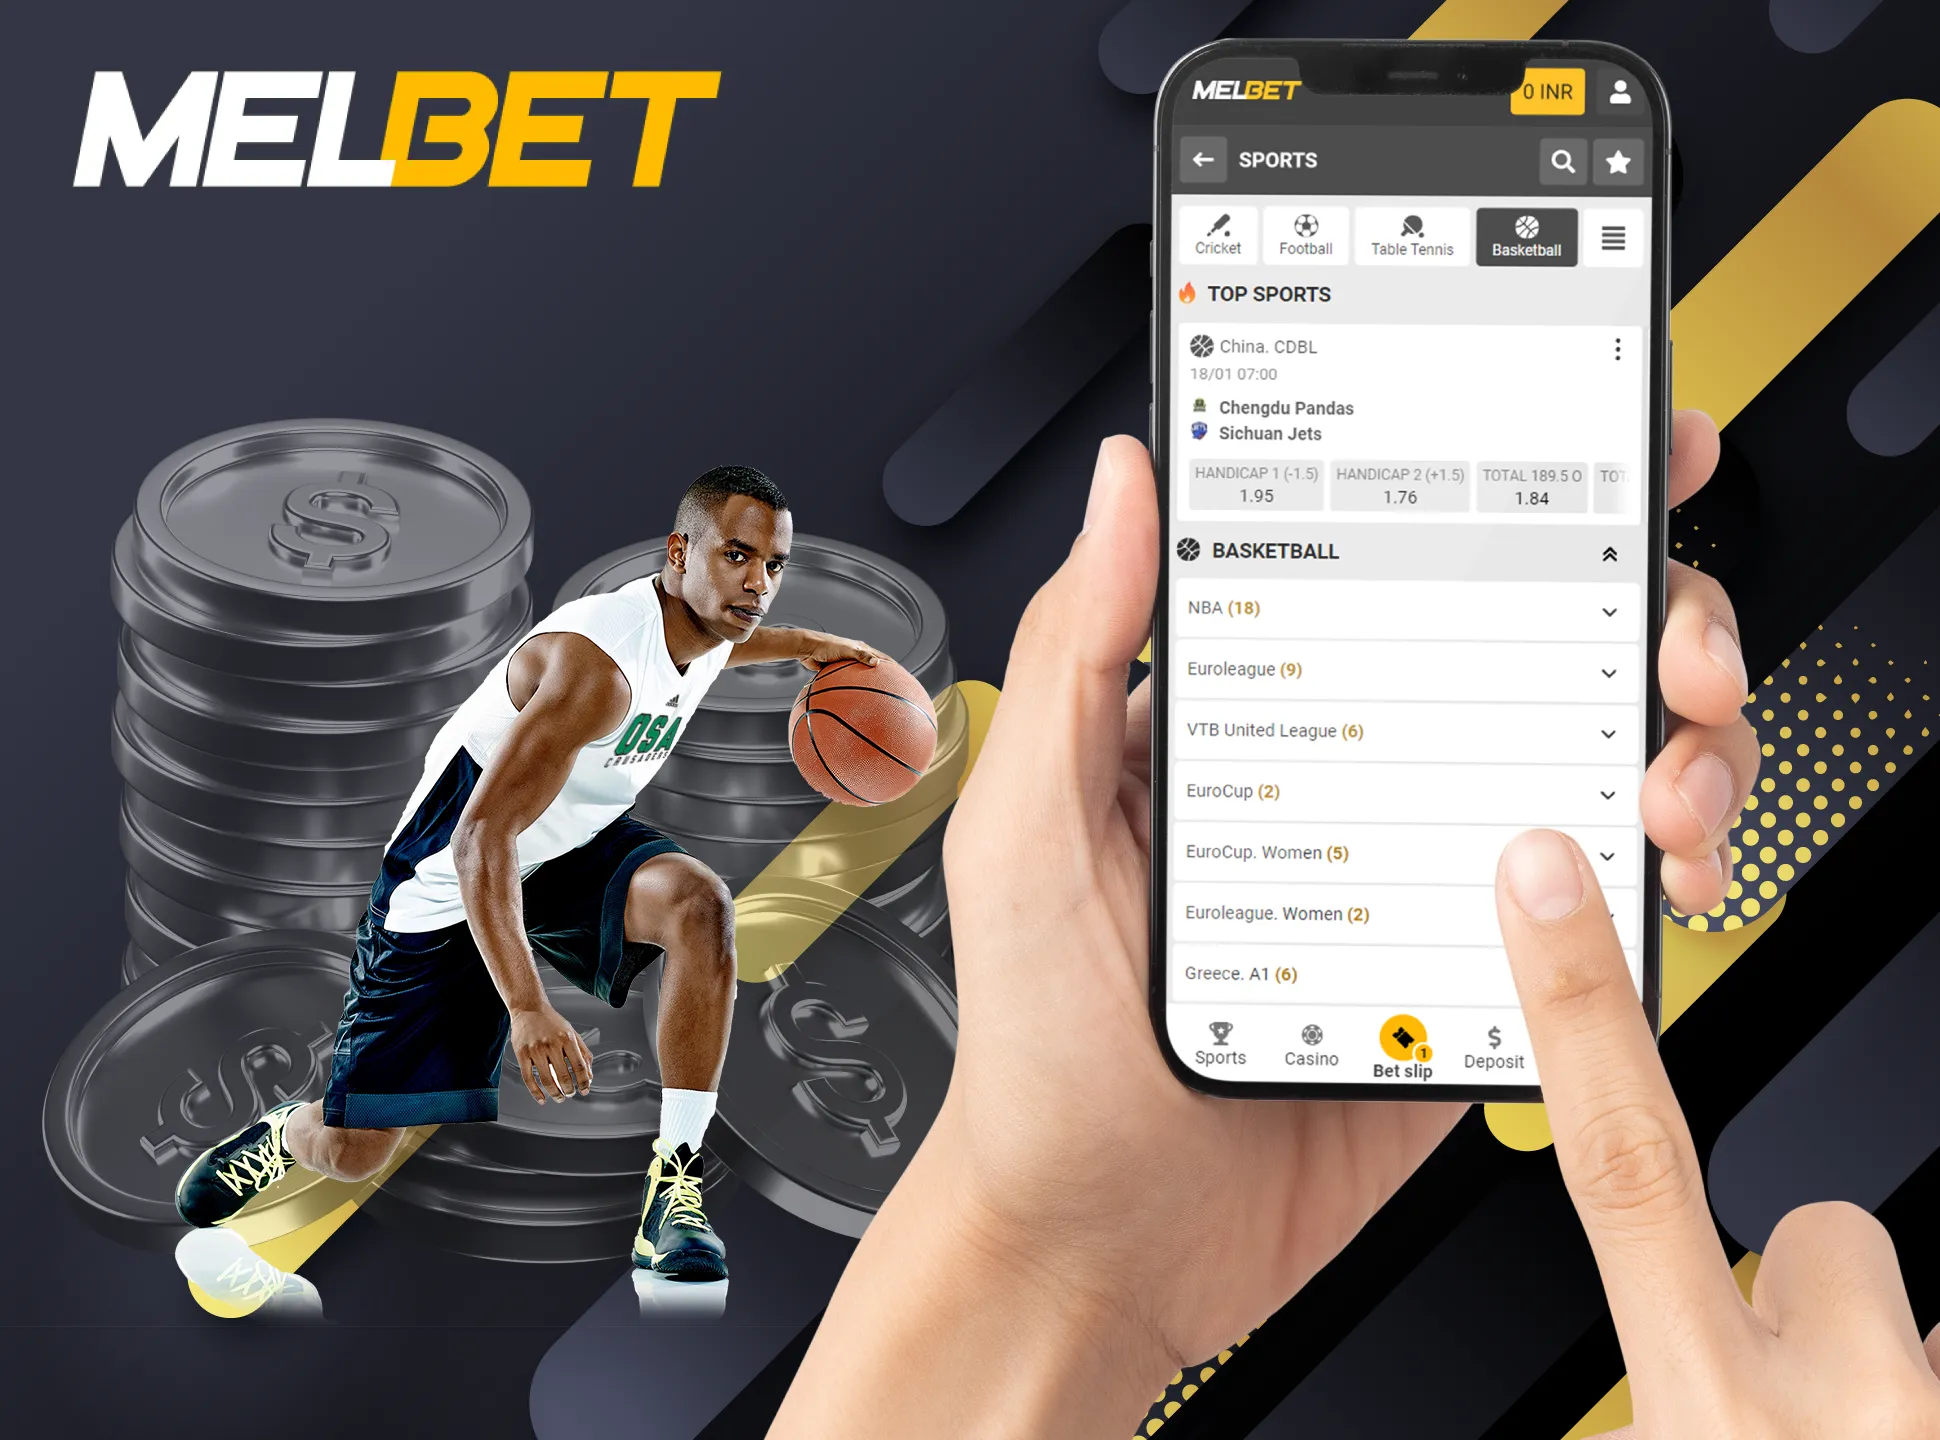 You will find various basketball leagues to bet on.